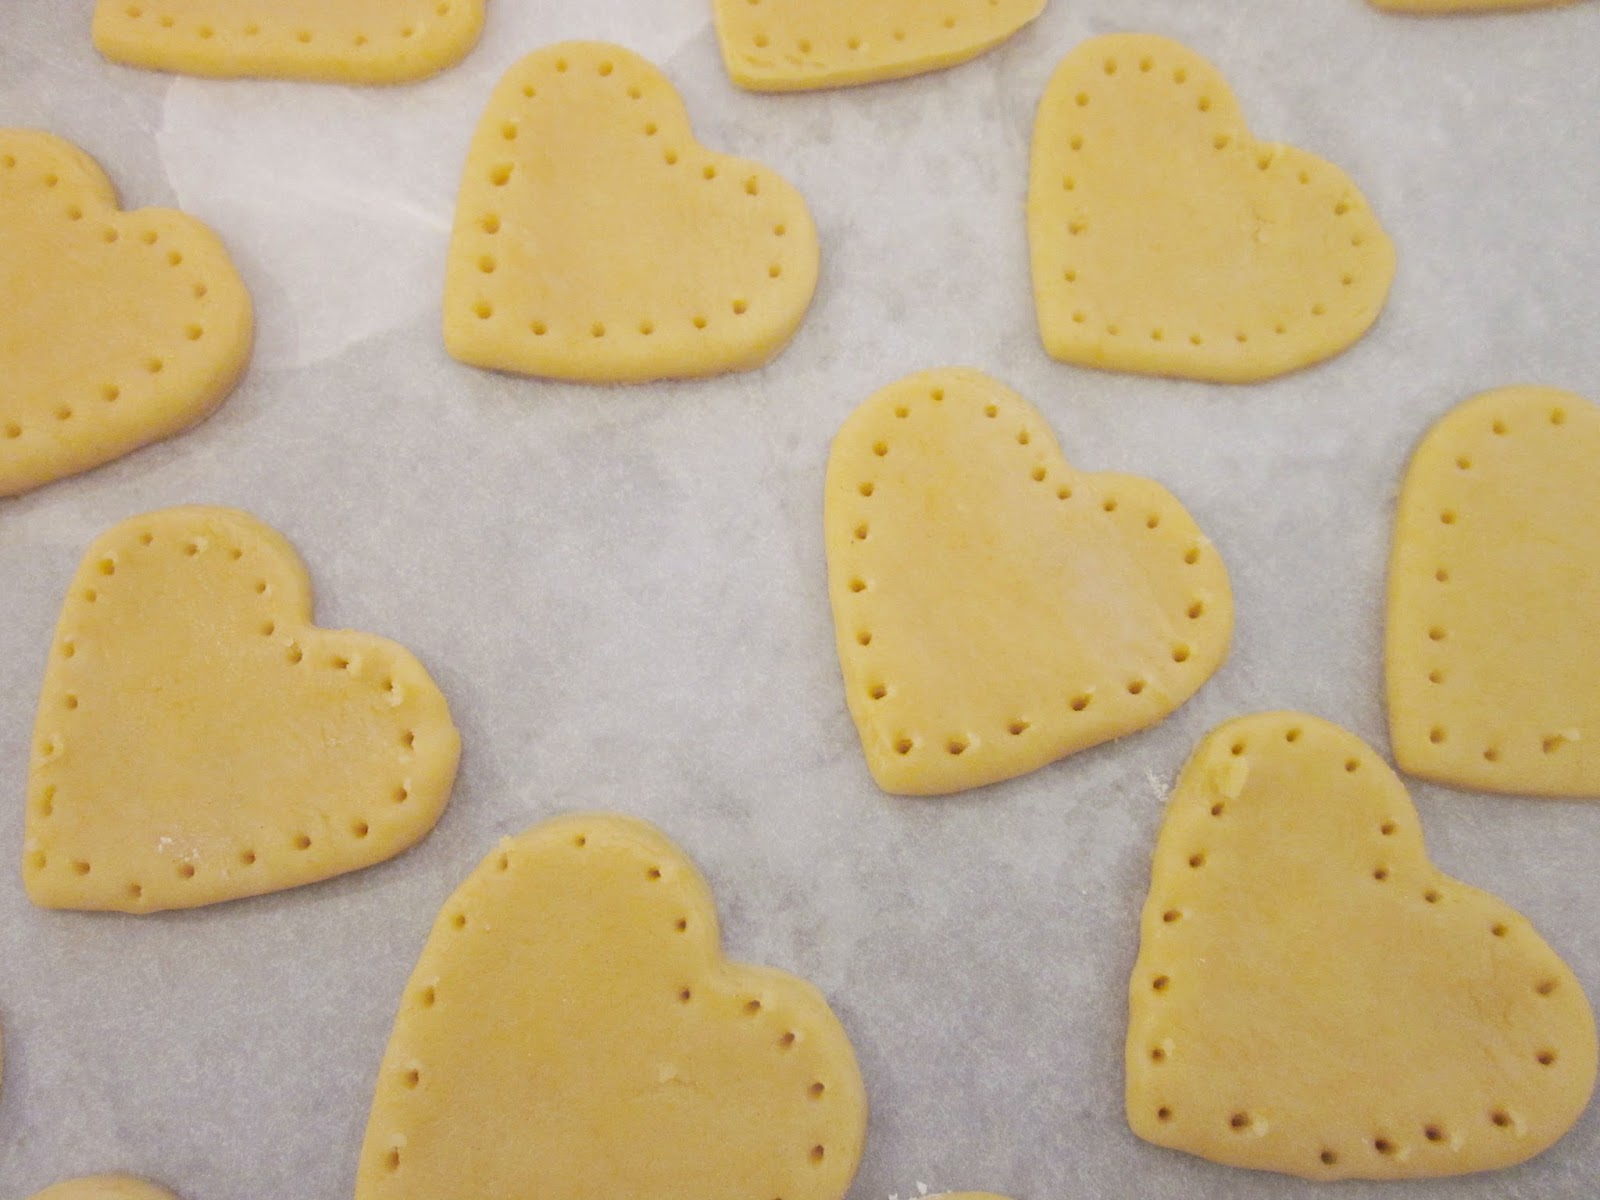 Heart-shaped biscuits on tray